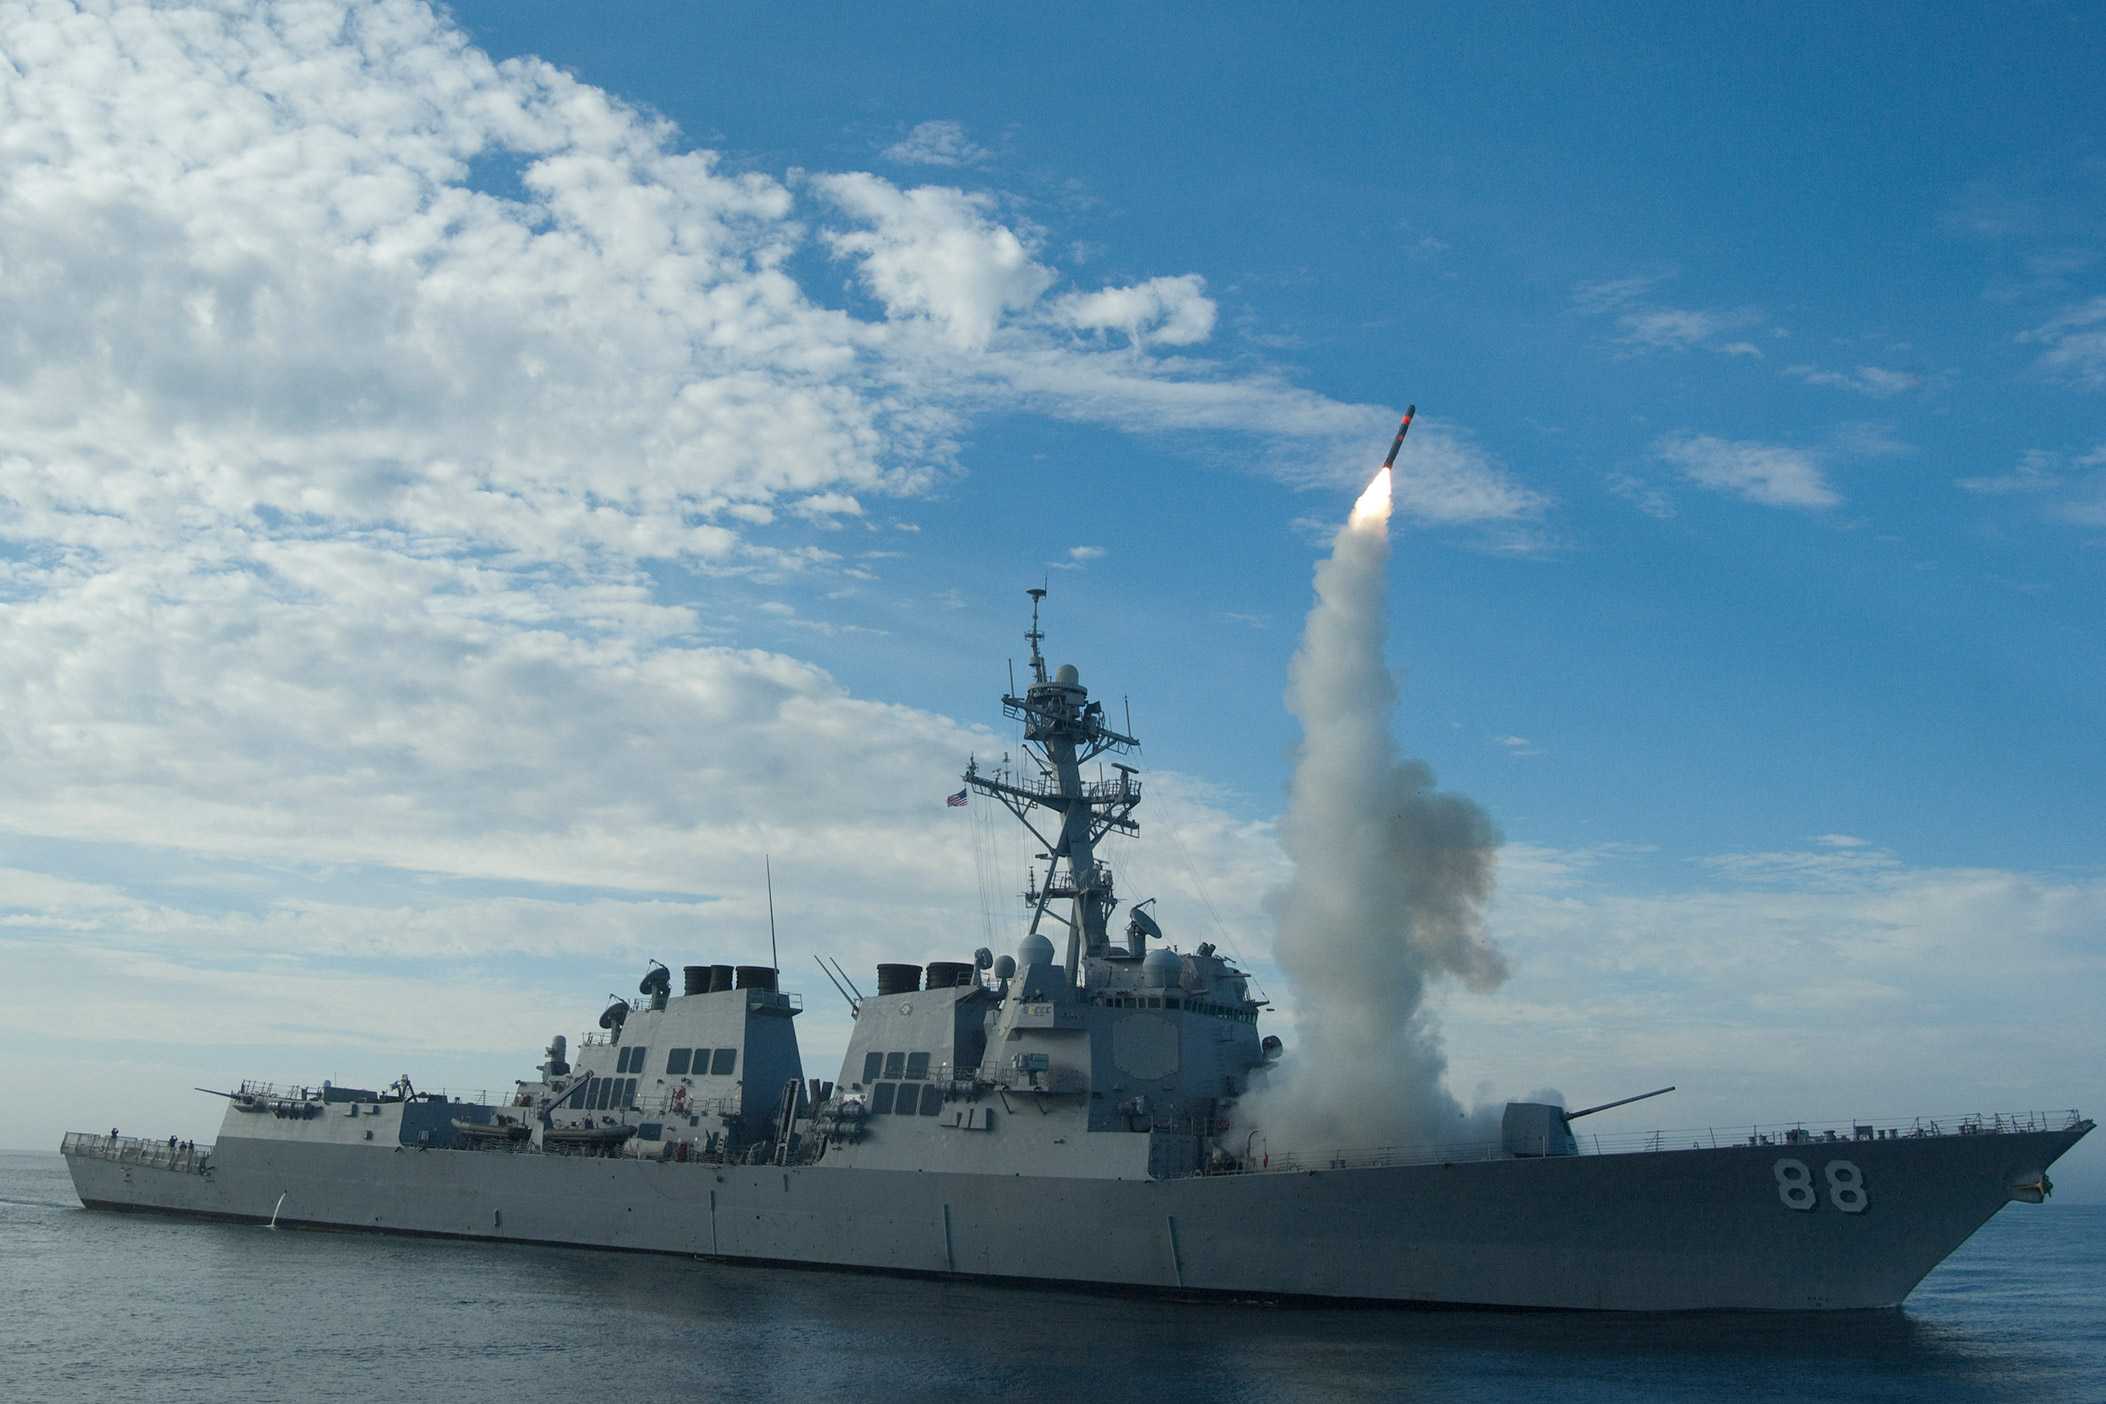 USS Preble fires a Tomahawk cruise missile